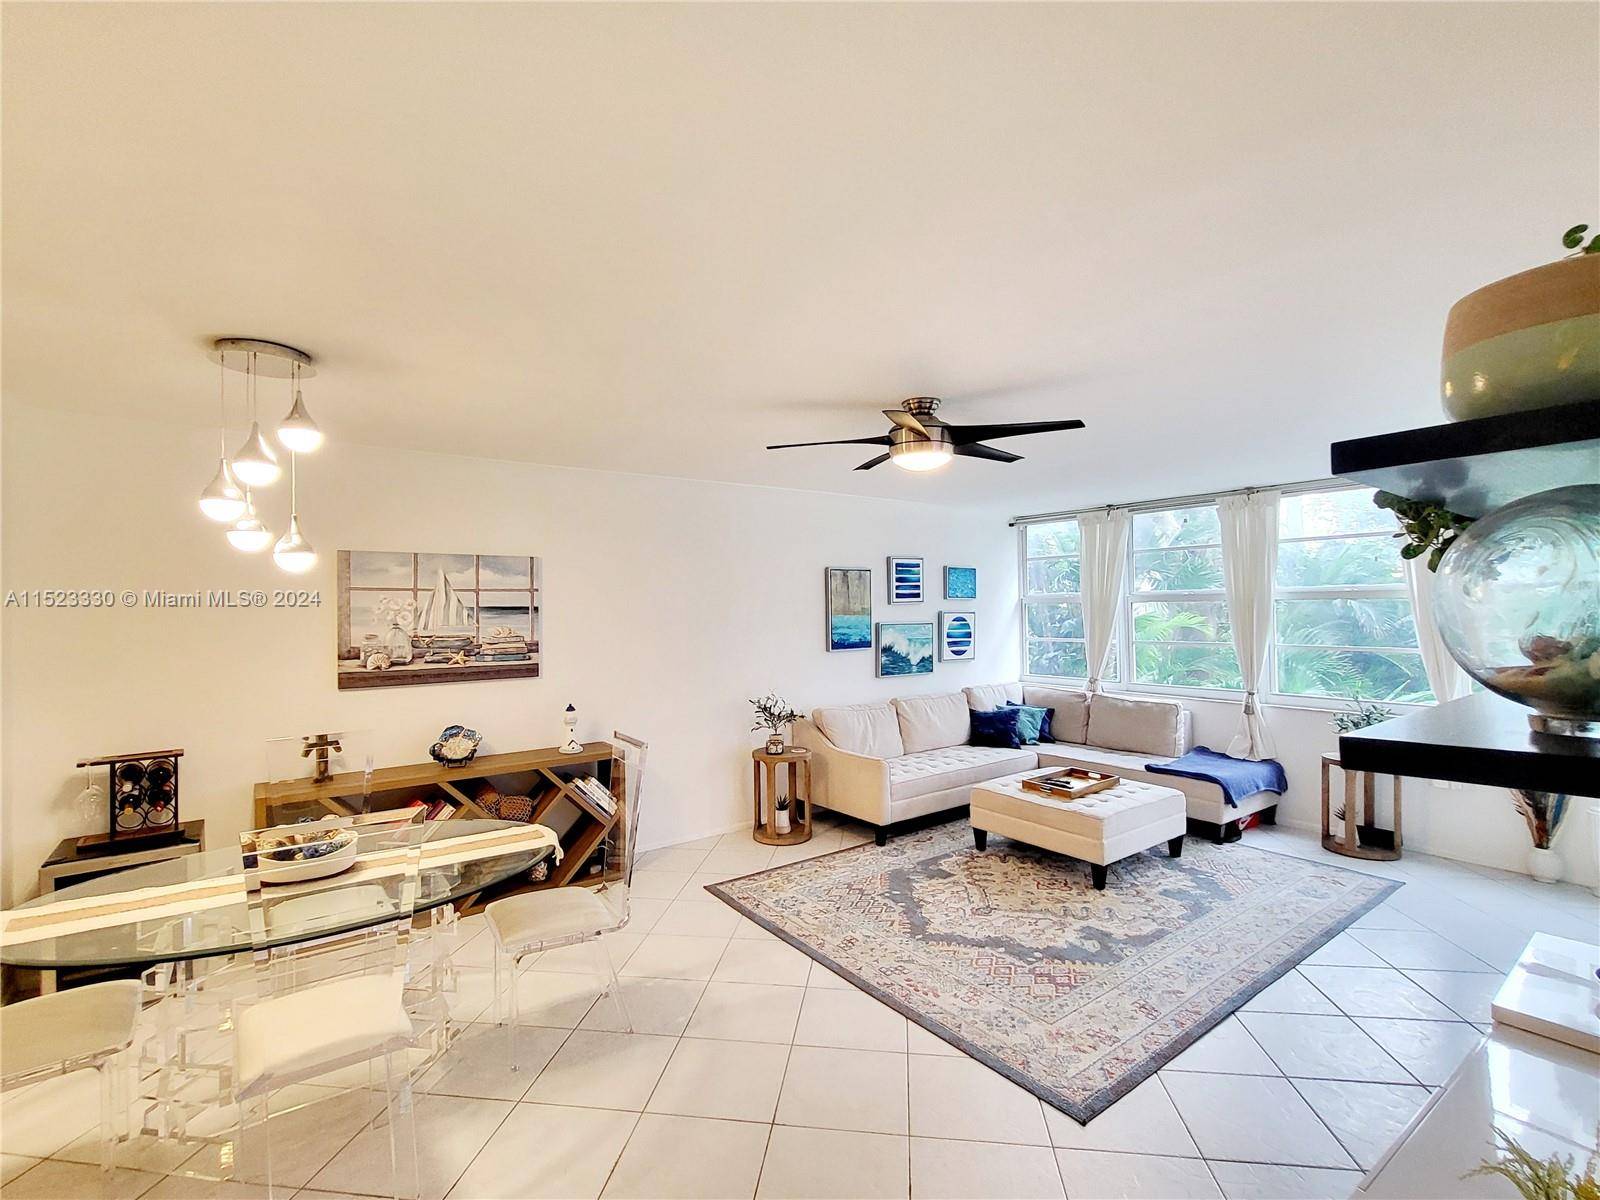 PRIME LOCATION IN THE HEART OF FT LAUDERDALE FIRST FLOOR SPACIOUS 1 1.